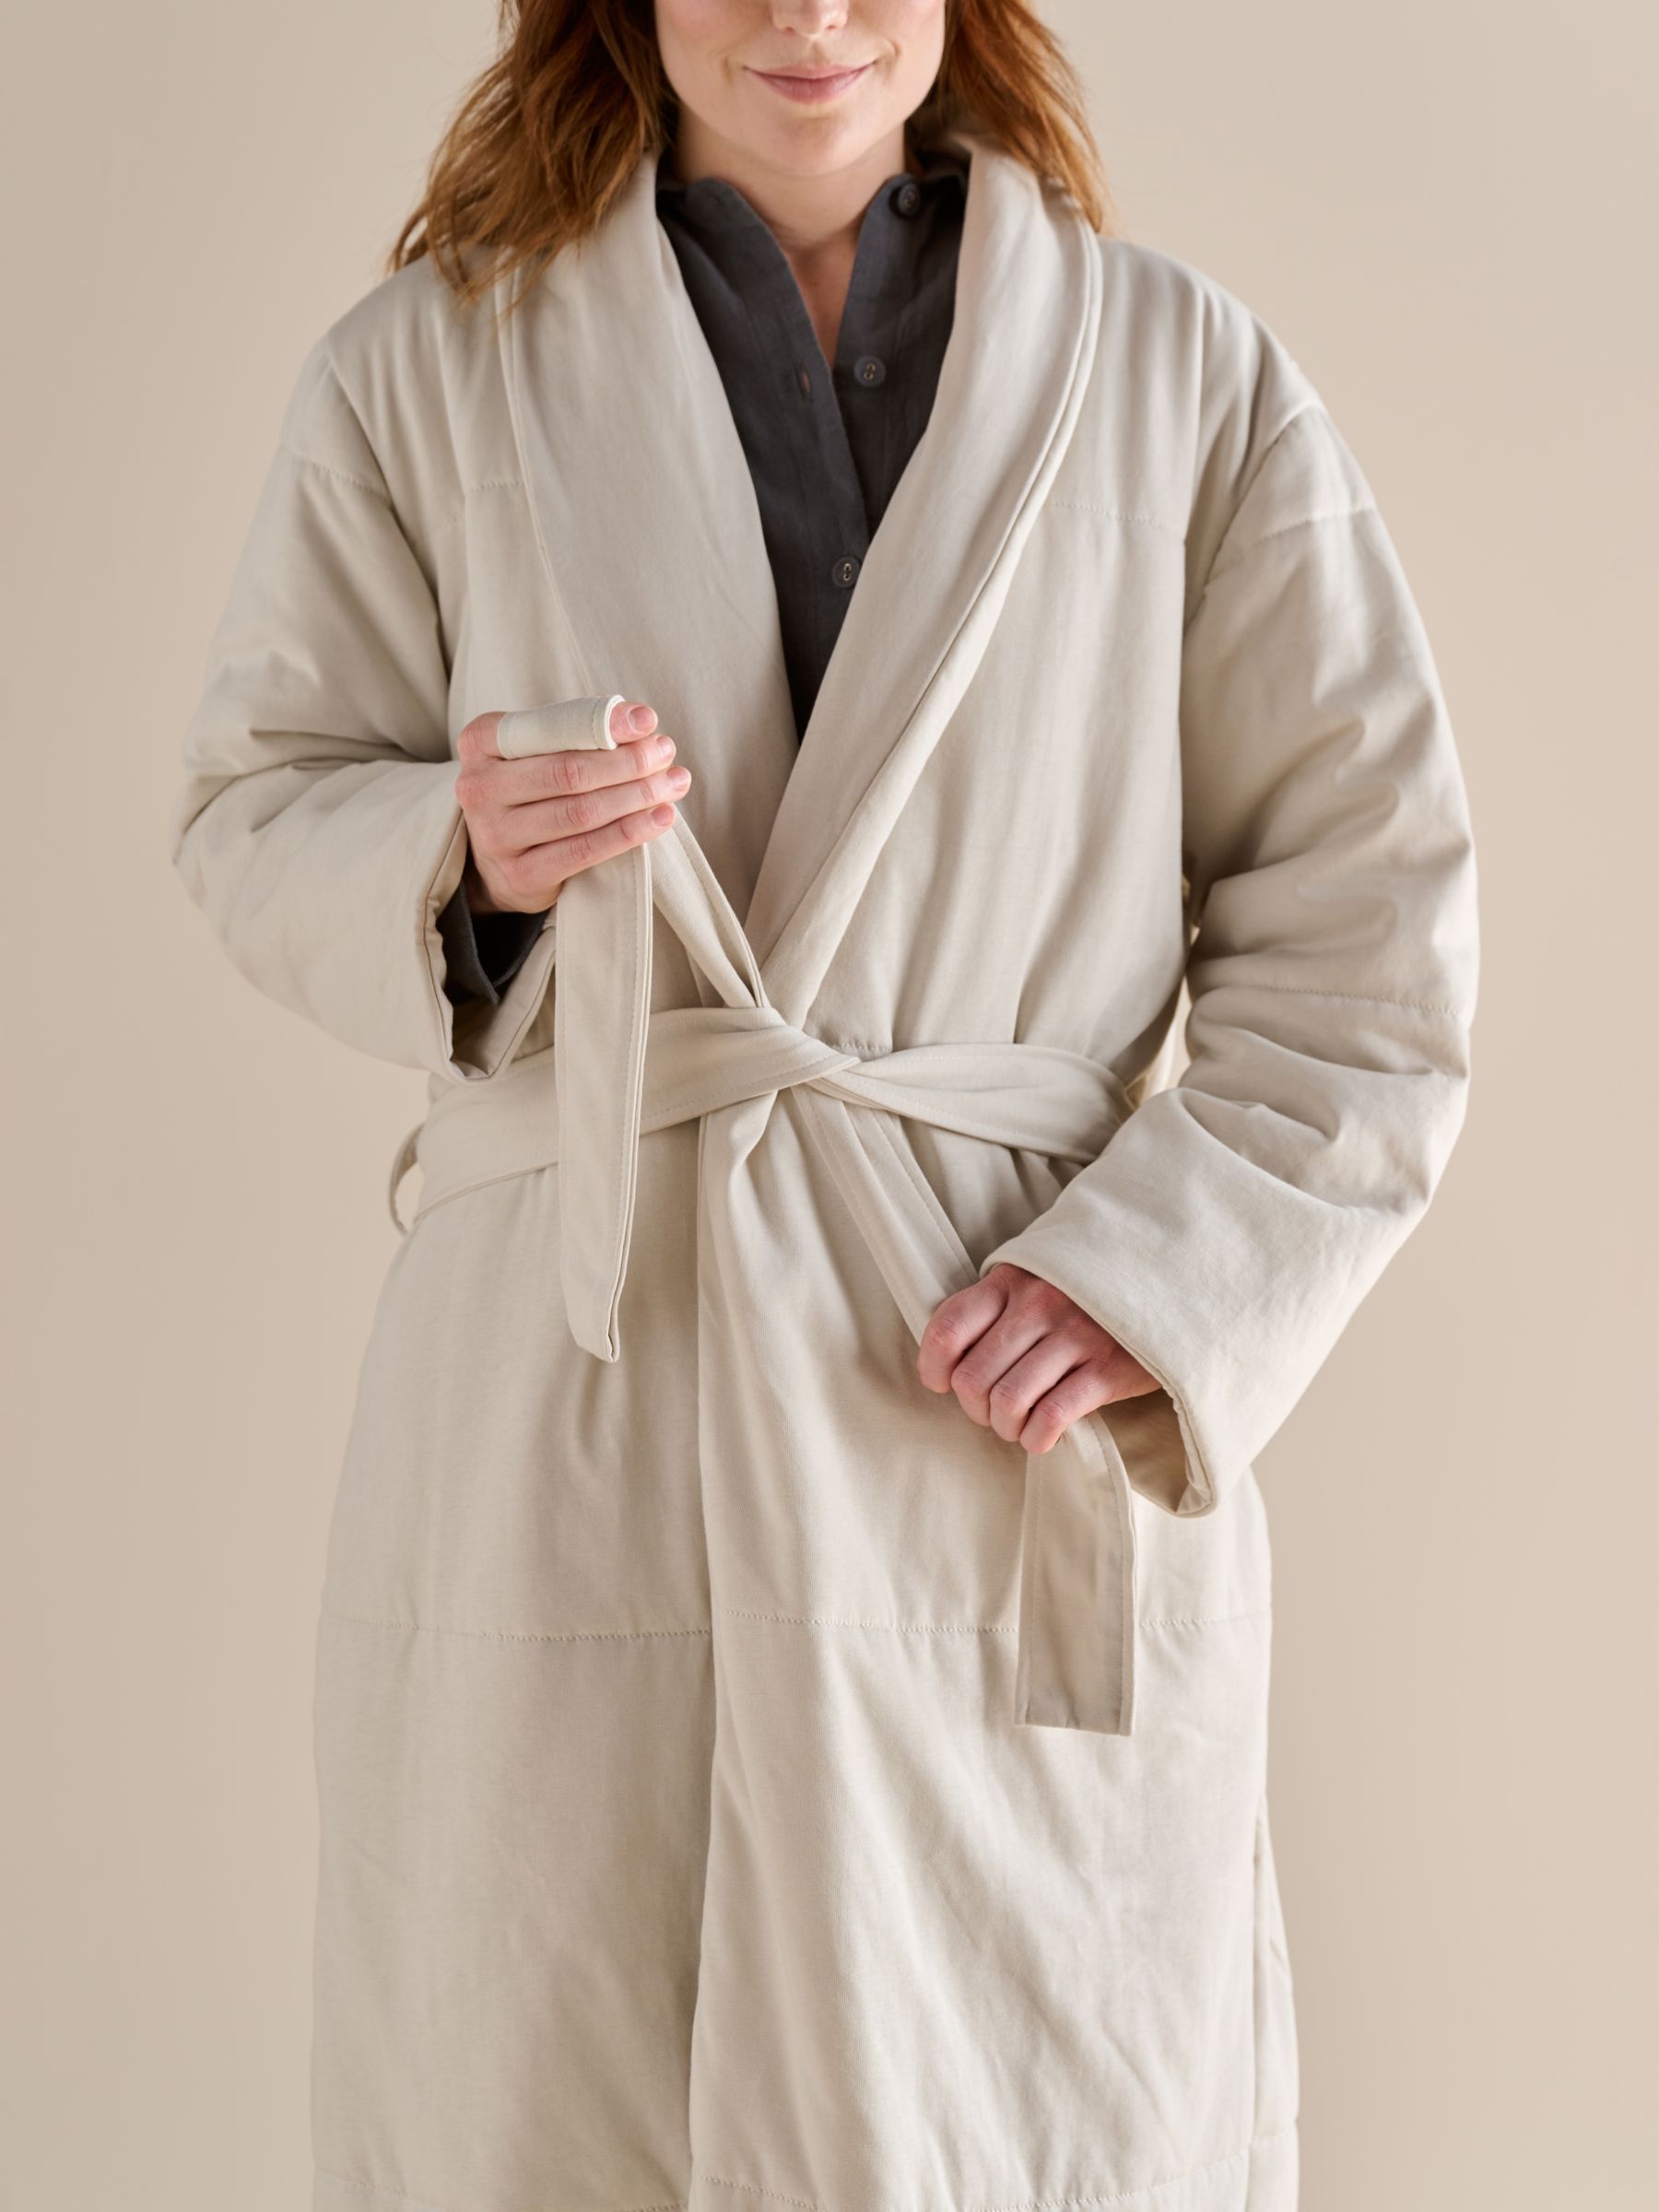 Bedfolk Housecoat Cotton Dressing Gown Robe, Clay, XS